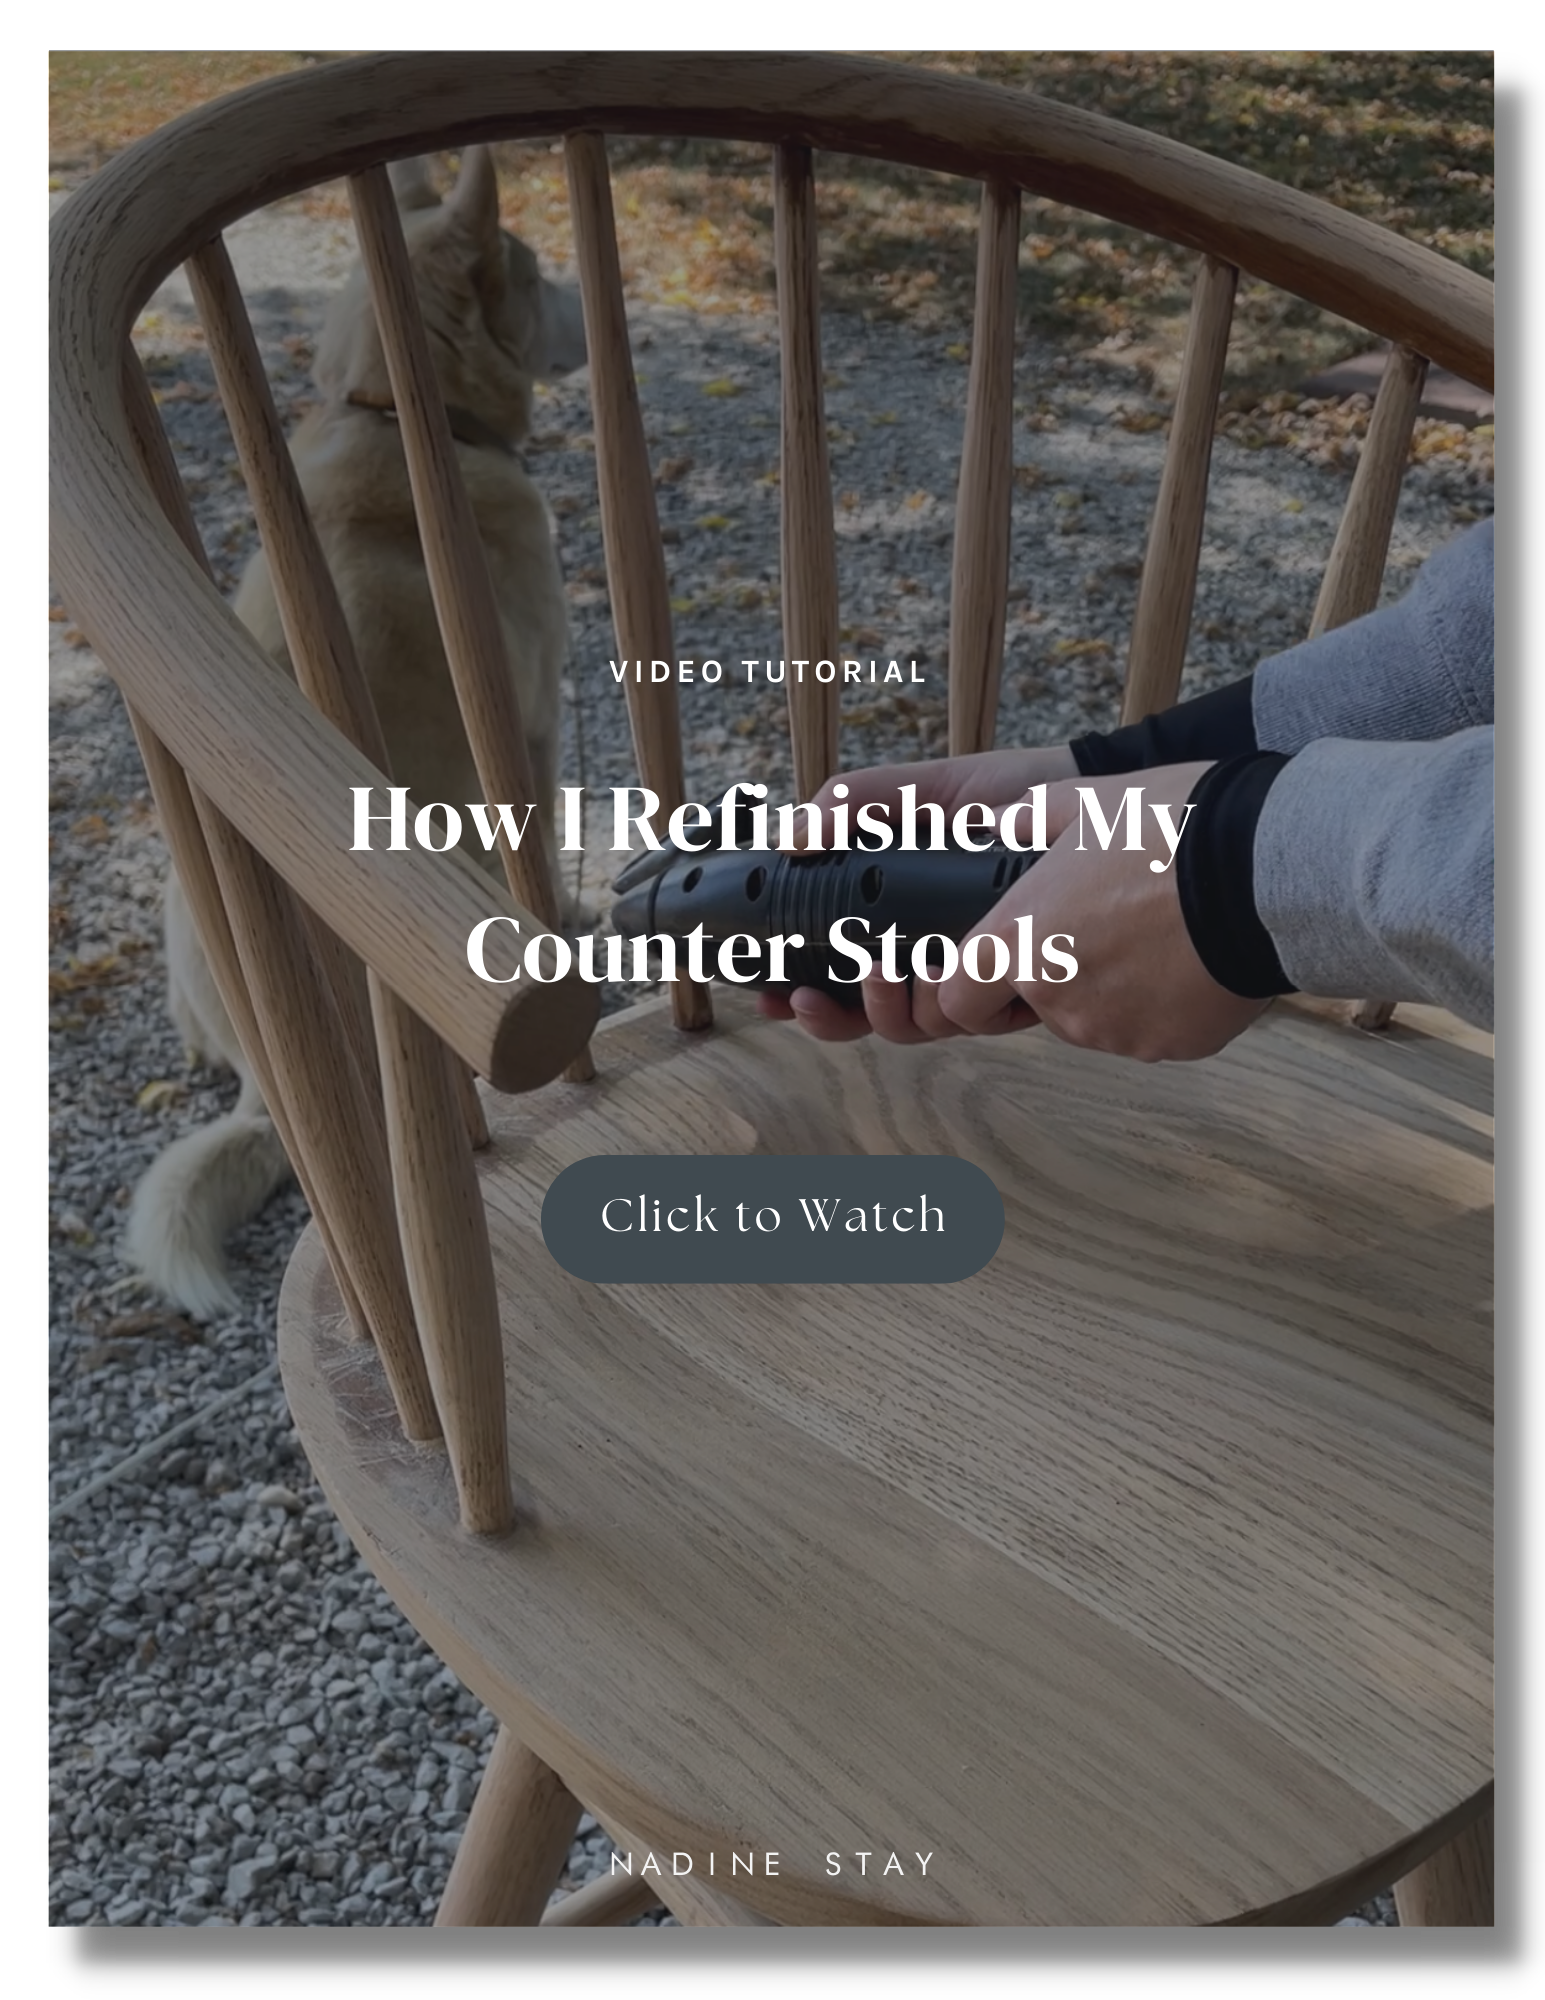 How to refinish oak wood counter stools - Nadine Stay | Furniture flip makeover on three spindle back counter stools. How to make golden oak wood look high end. My favorite dark stain color. Kitchen counter stool inspiration. Modern cabin kitchen.